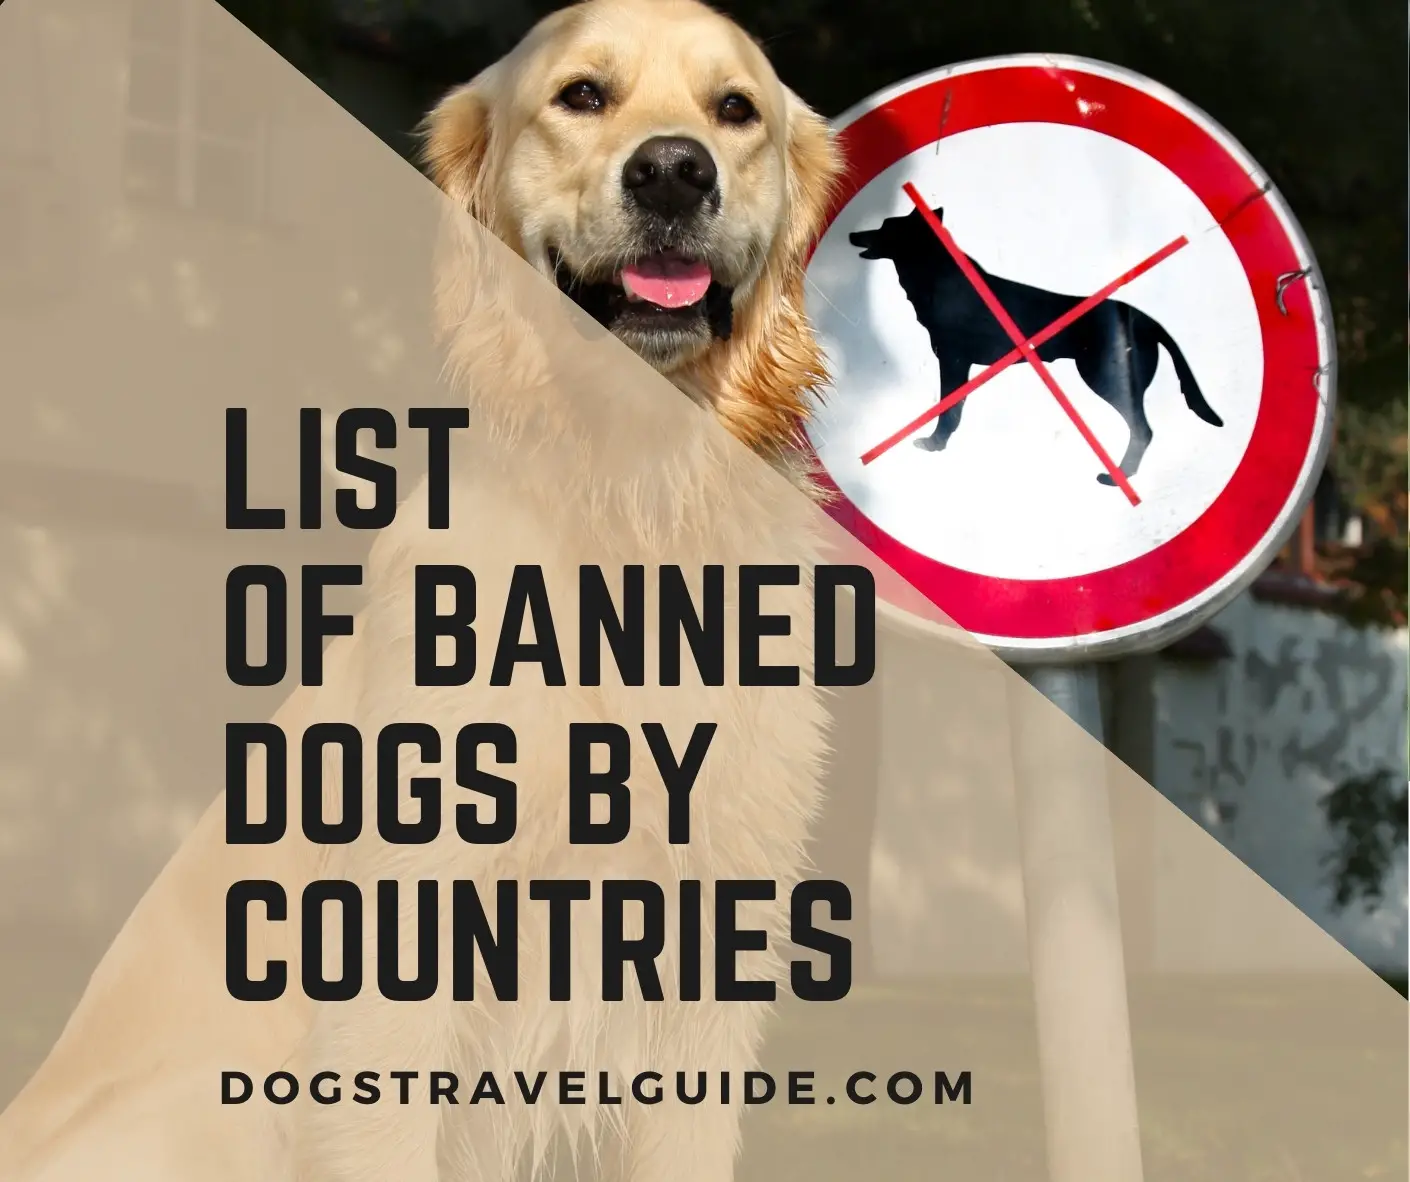 countries-that-donot-allow-dogs.jpg